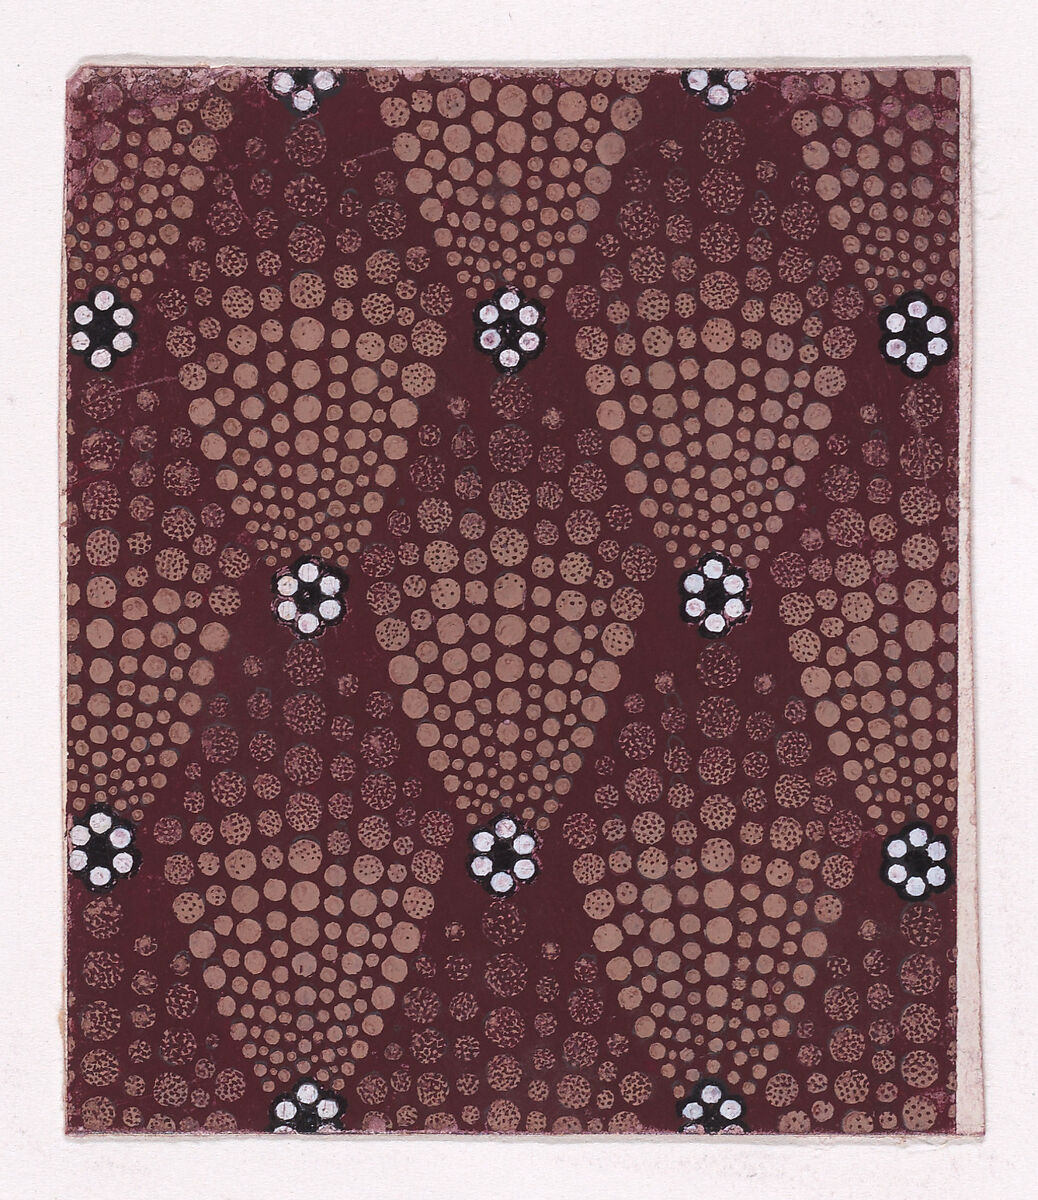 Textile Design with Rosettes of Pearls Flanked with Abstract Palmettes of Dots, Anonymous, Alsatian, 19th century, Gouache 